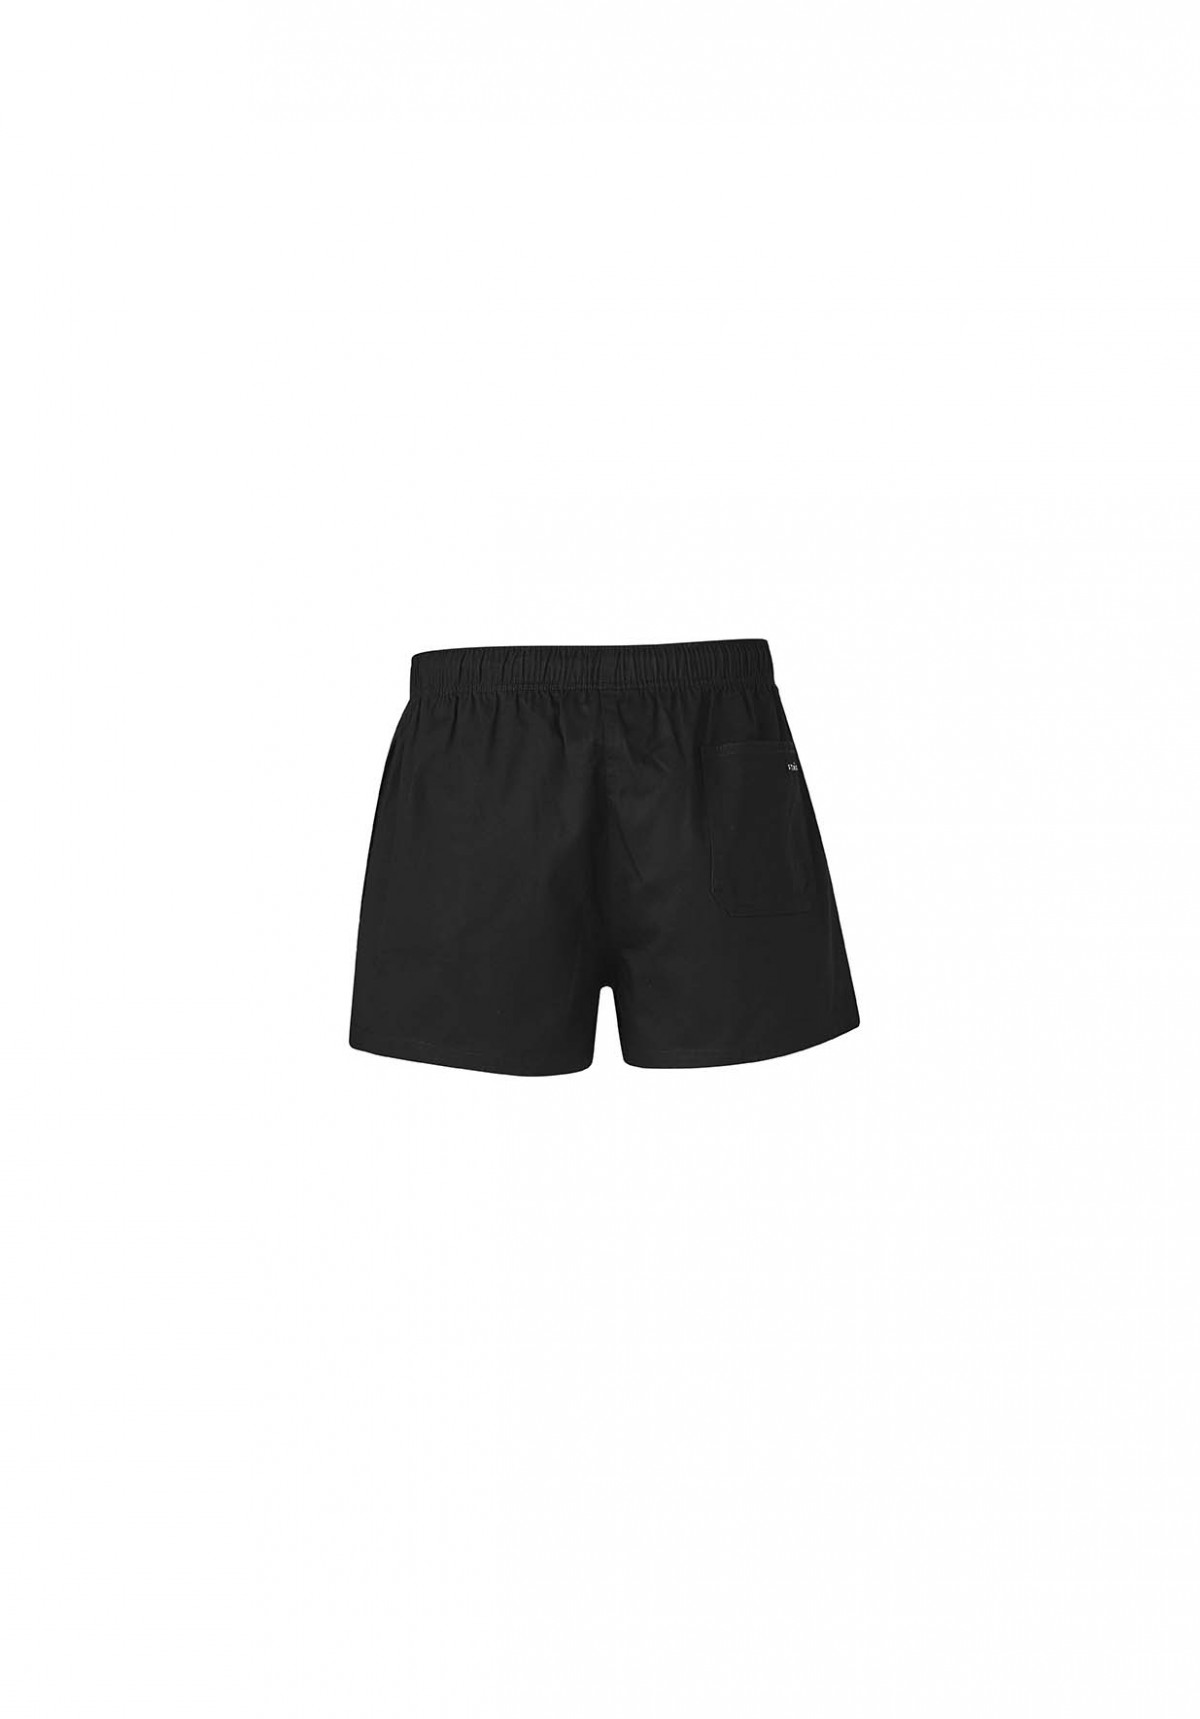 Buy Men's Rugby Short 100% Cotton Twill in NZ | The Uniform Centre